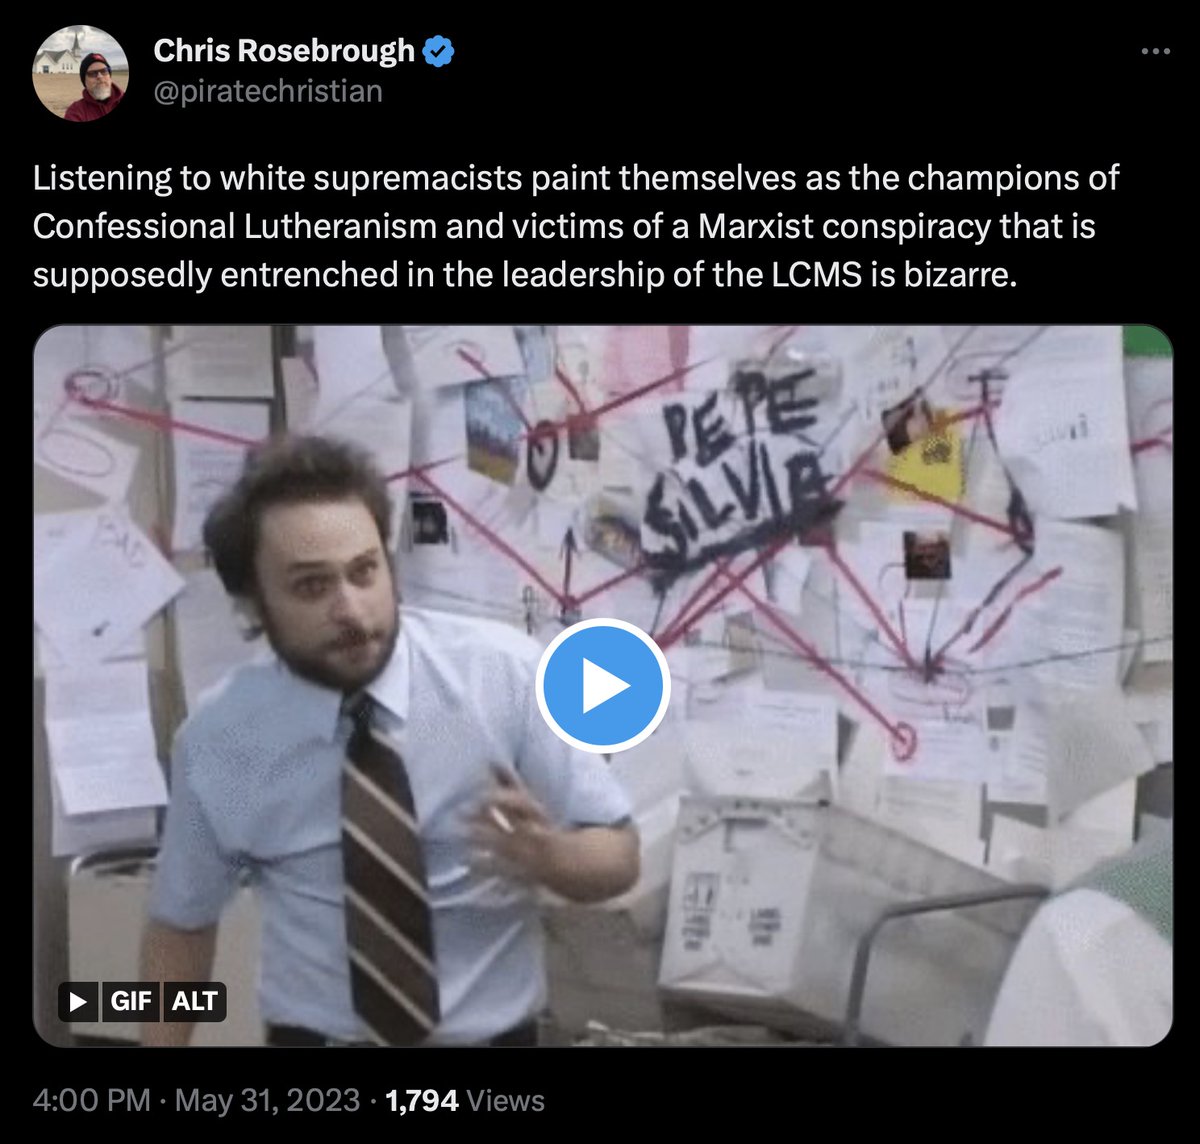 At 3:00 pm we released the episode detailing that the LCMS doxed me to numerous pastors including Chris Rosebrough.

At 4:00 Chris confirmed he was listening to the episode where we connect him to Antifa

At 4:52 Antifa published my dox, pretending they did they work themselves.